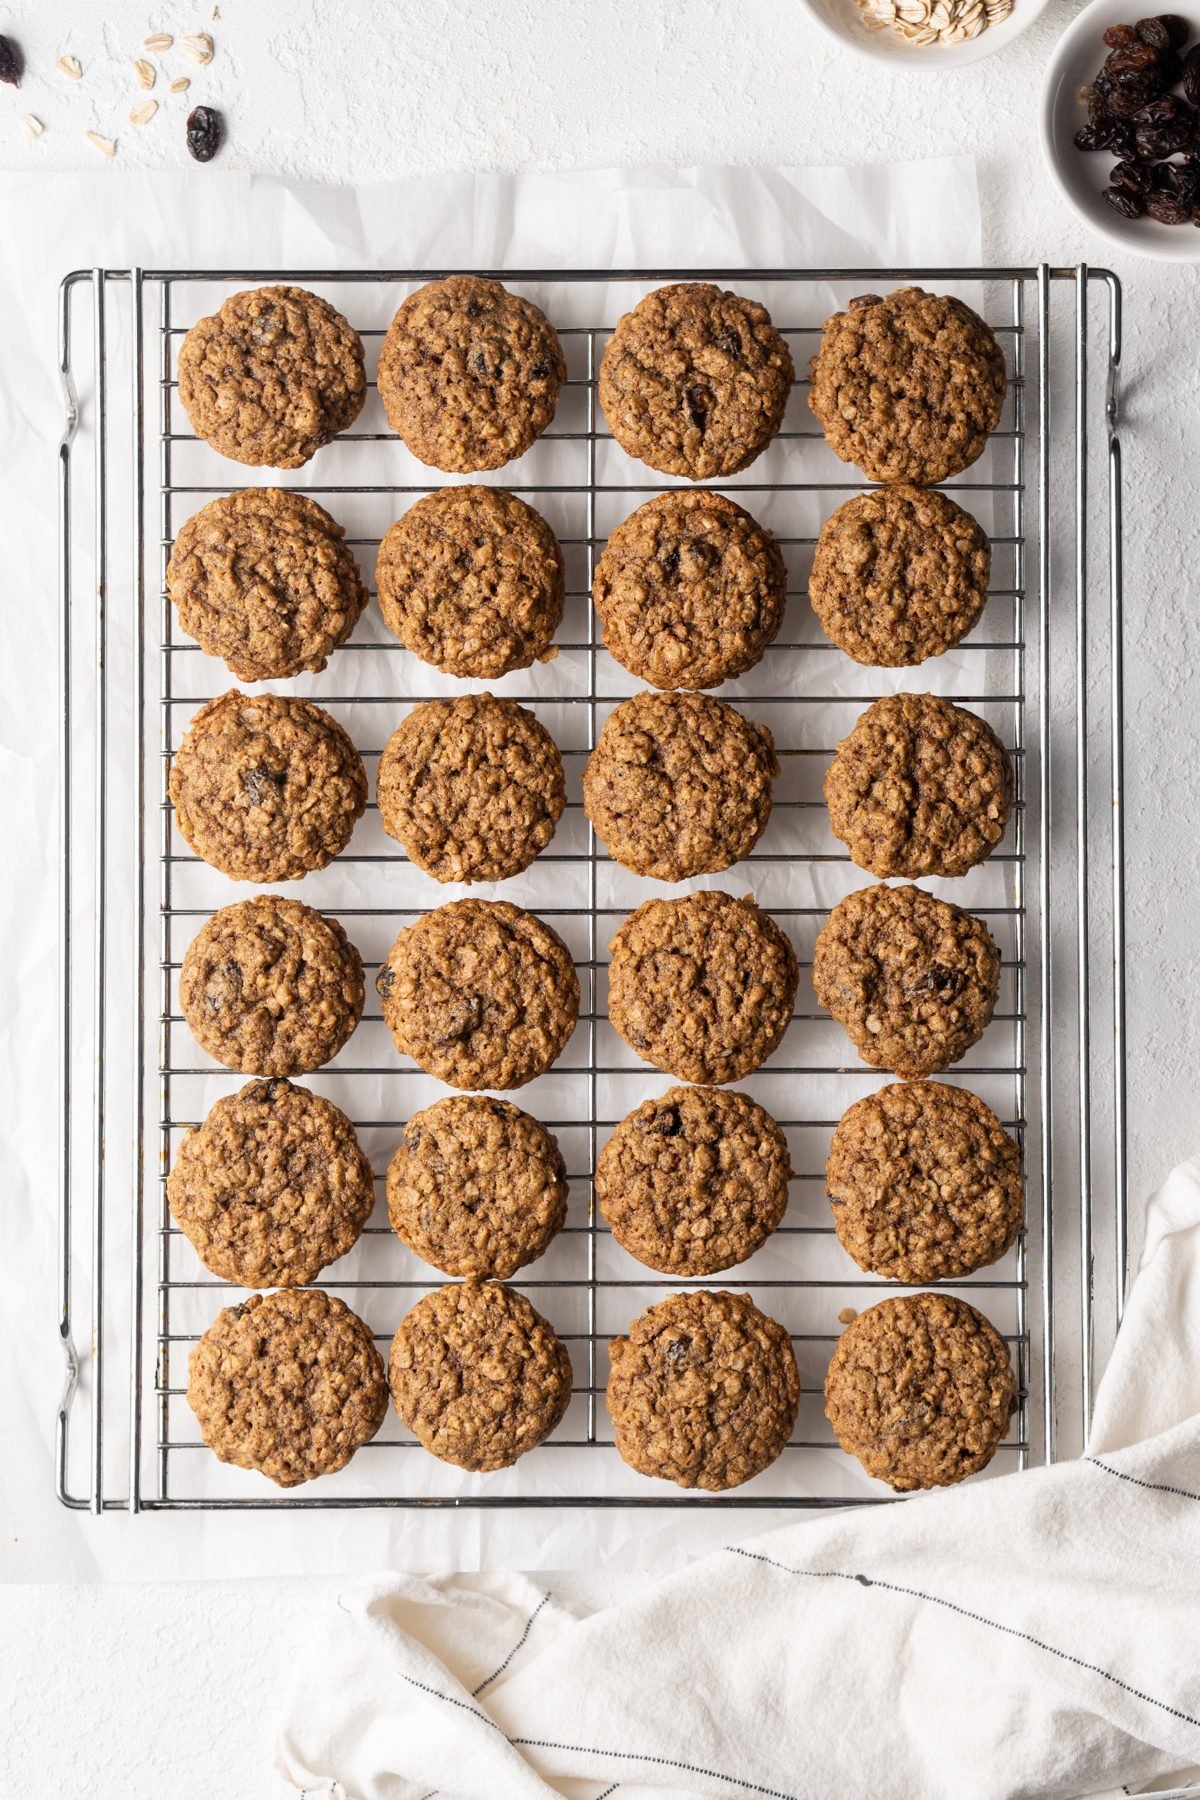 Maple oatmeal cookies on a wire rack.